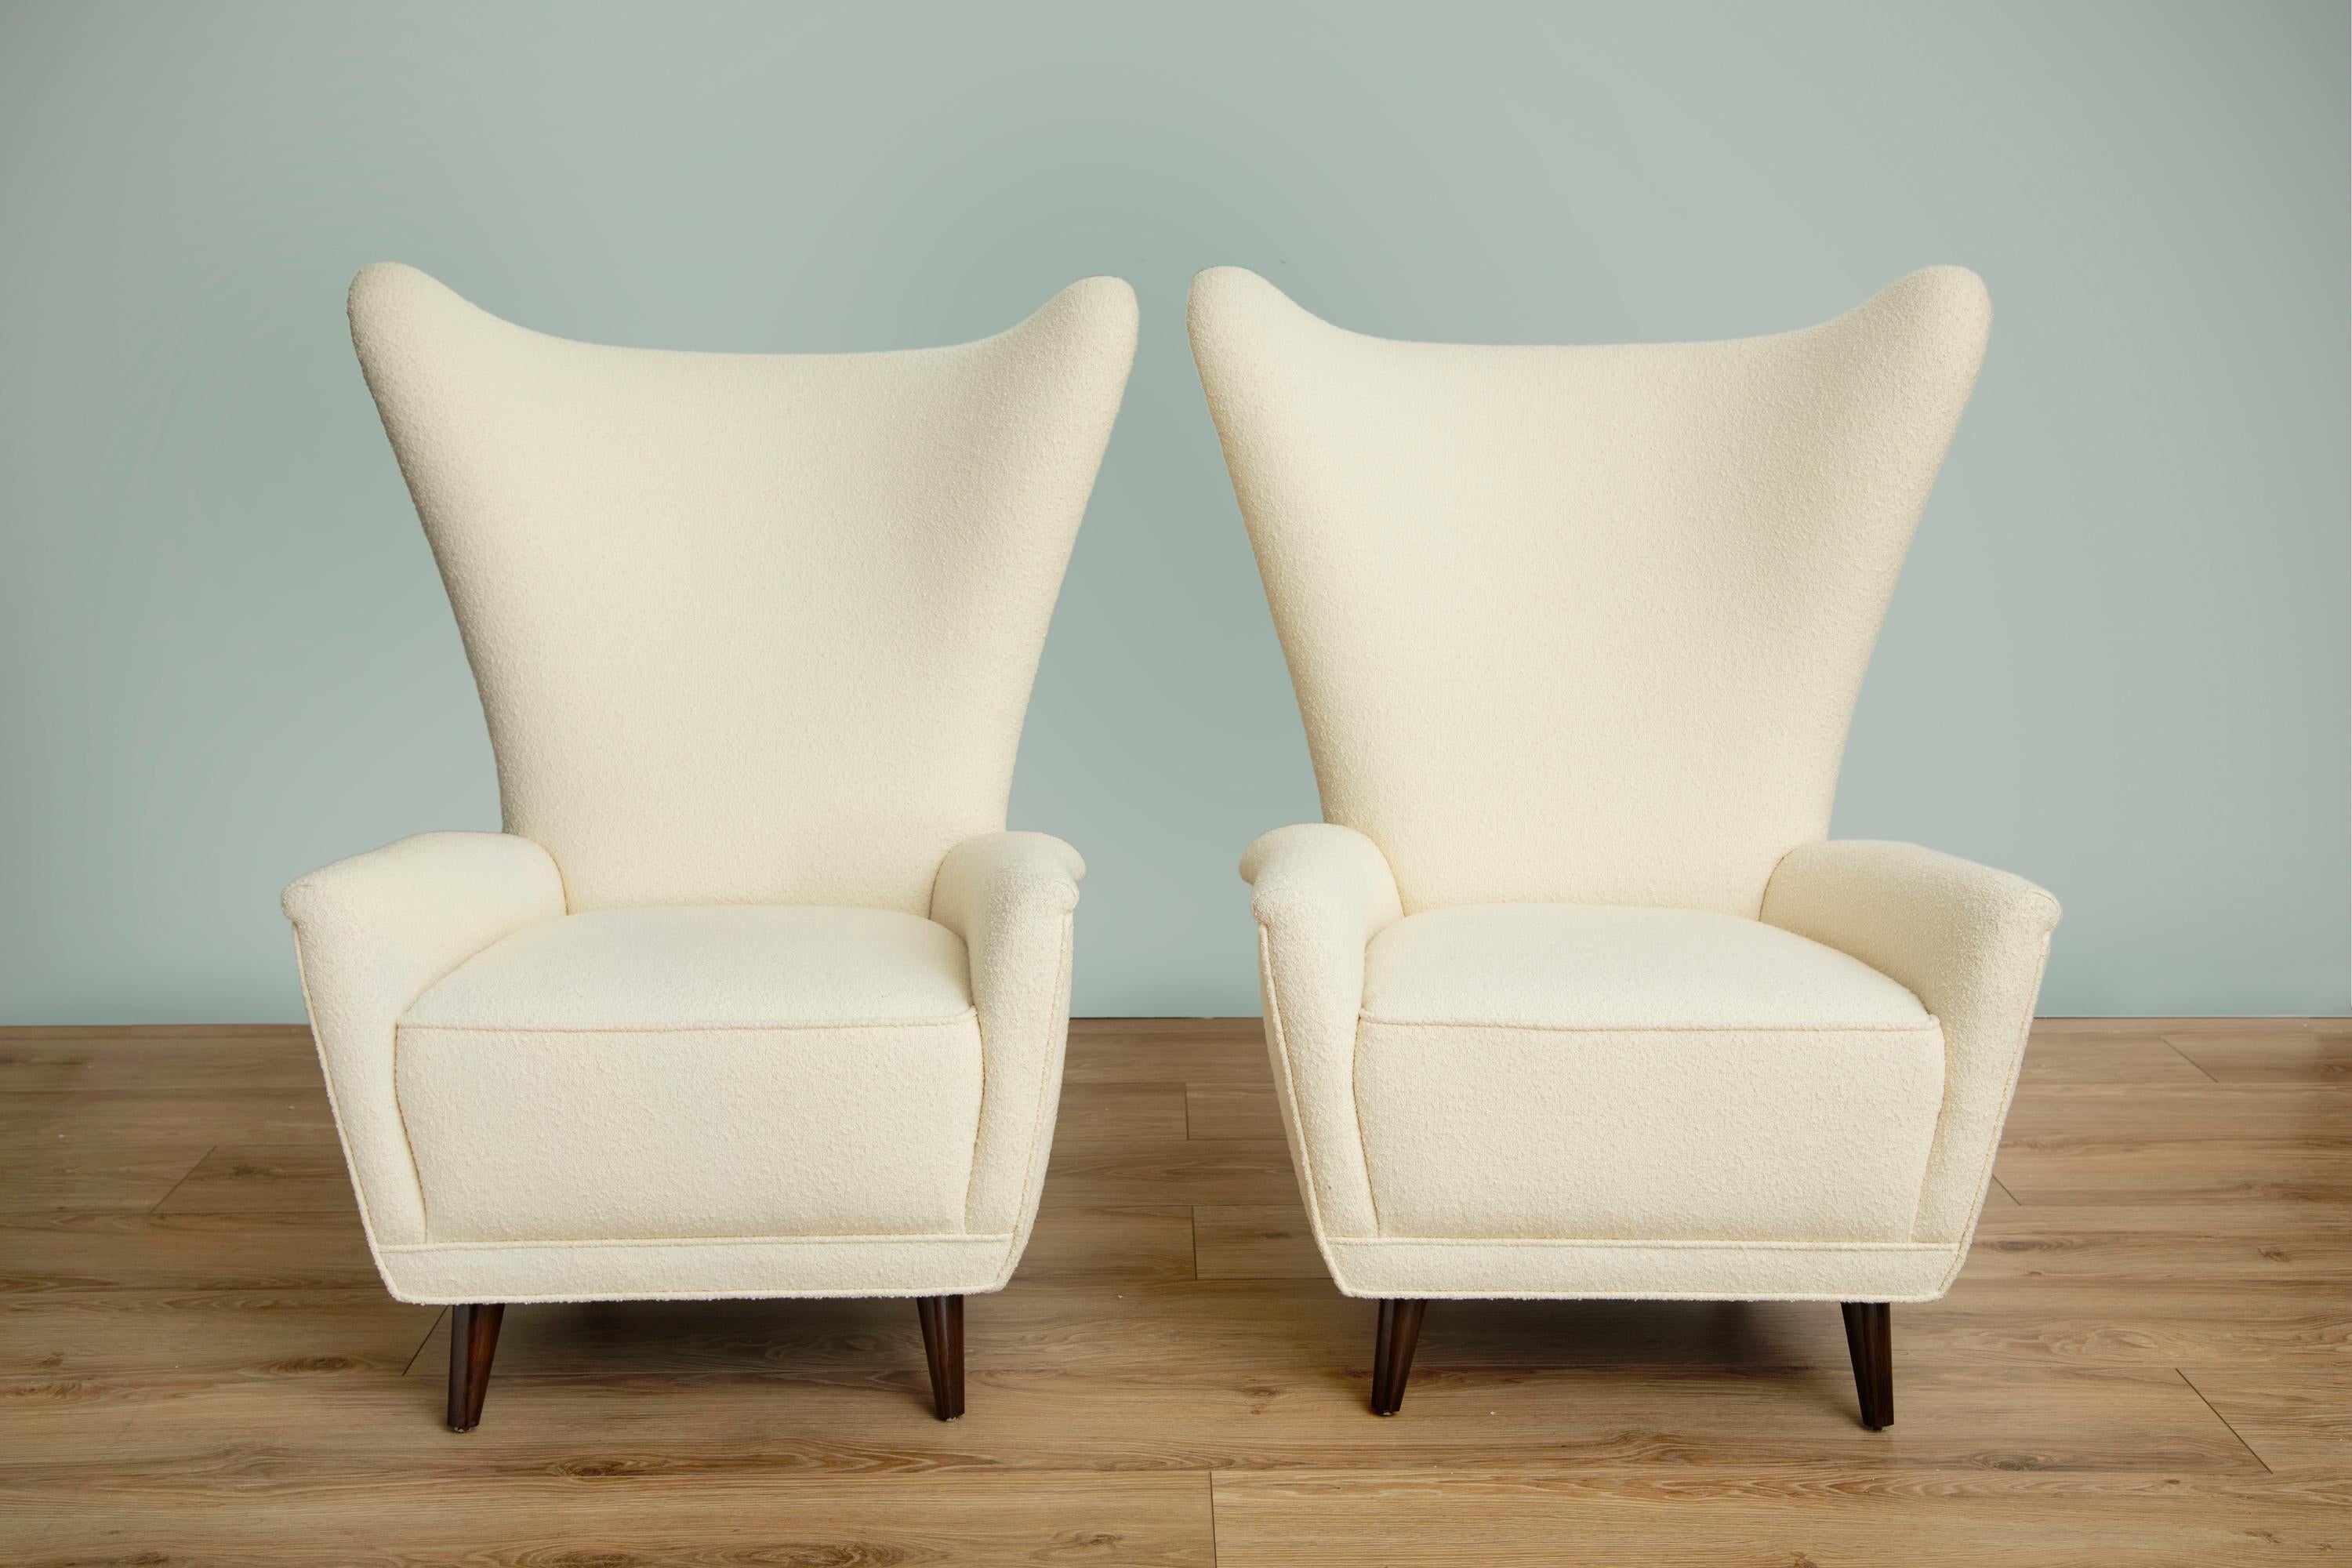 Pair of Mid-Century Modern wingback lounge chairs in the style of Gio Ponti,
High backrest with curvaceous wings and gently curved armrests,
Comfortable Classic lounge chair newly upholstered in pearl bouclé by Knoll,
Ebonized conical wood